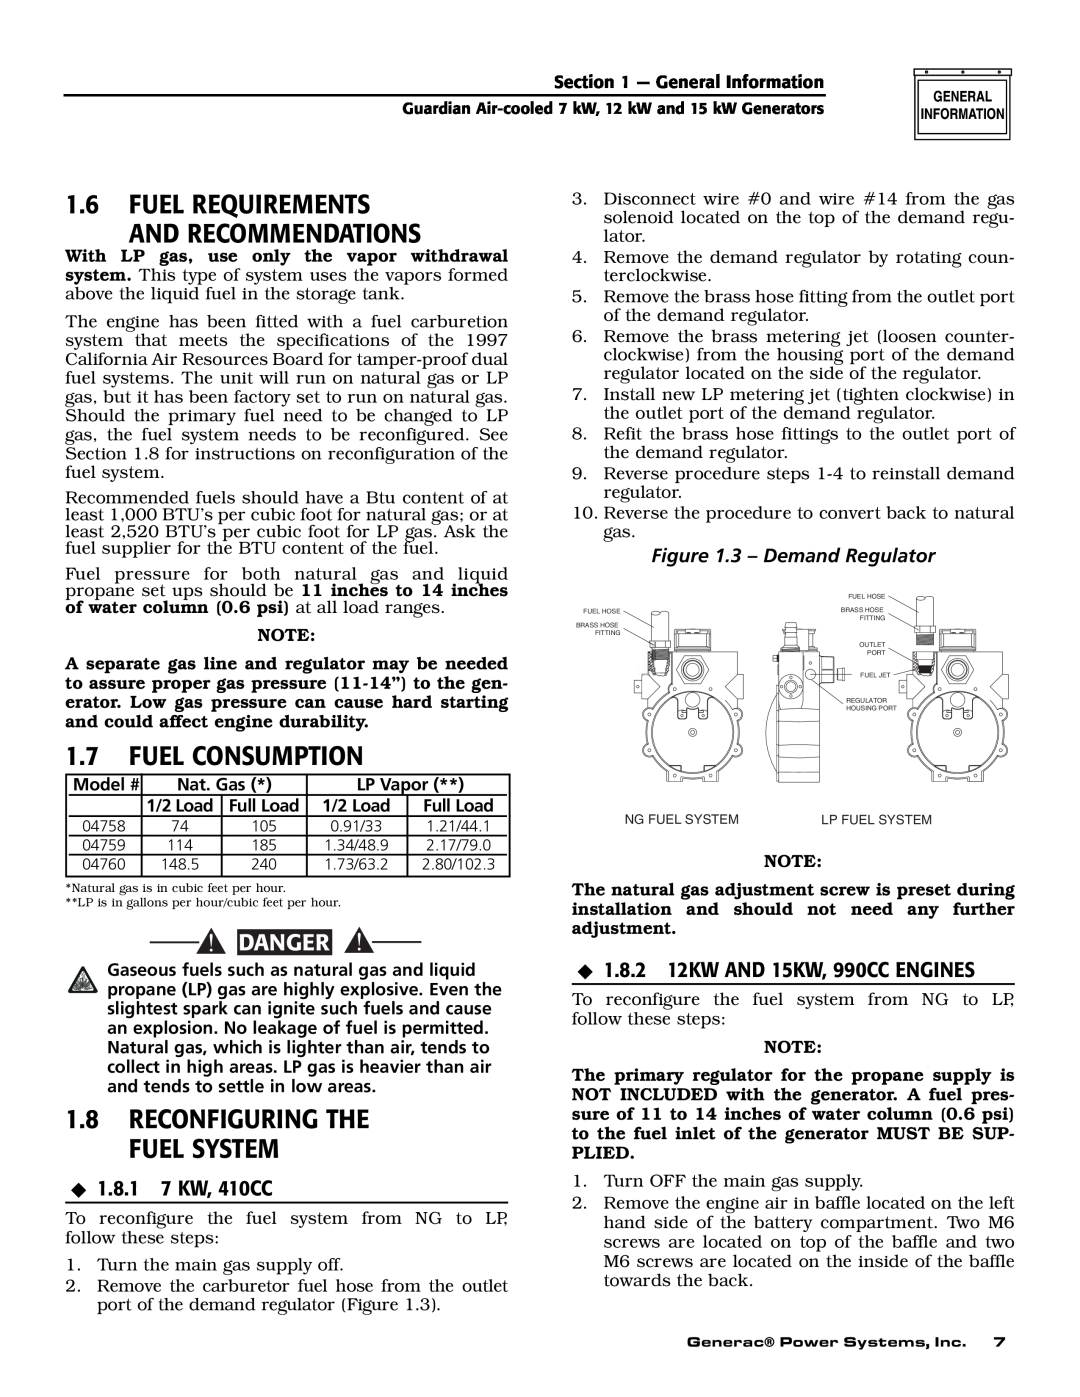 Generac Power Systems 04758-1, 04759-1, 04760-1 Fuel Requirements And Recommendations, Fuel Consumption, Danger, Model # 